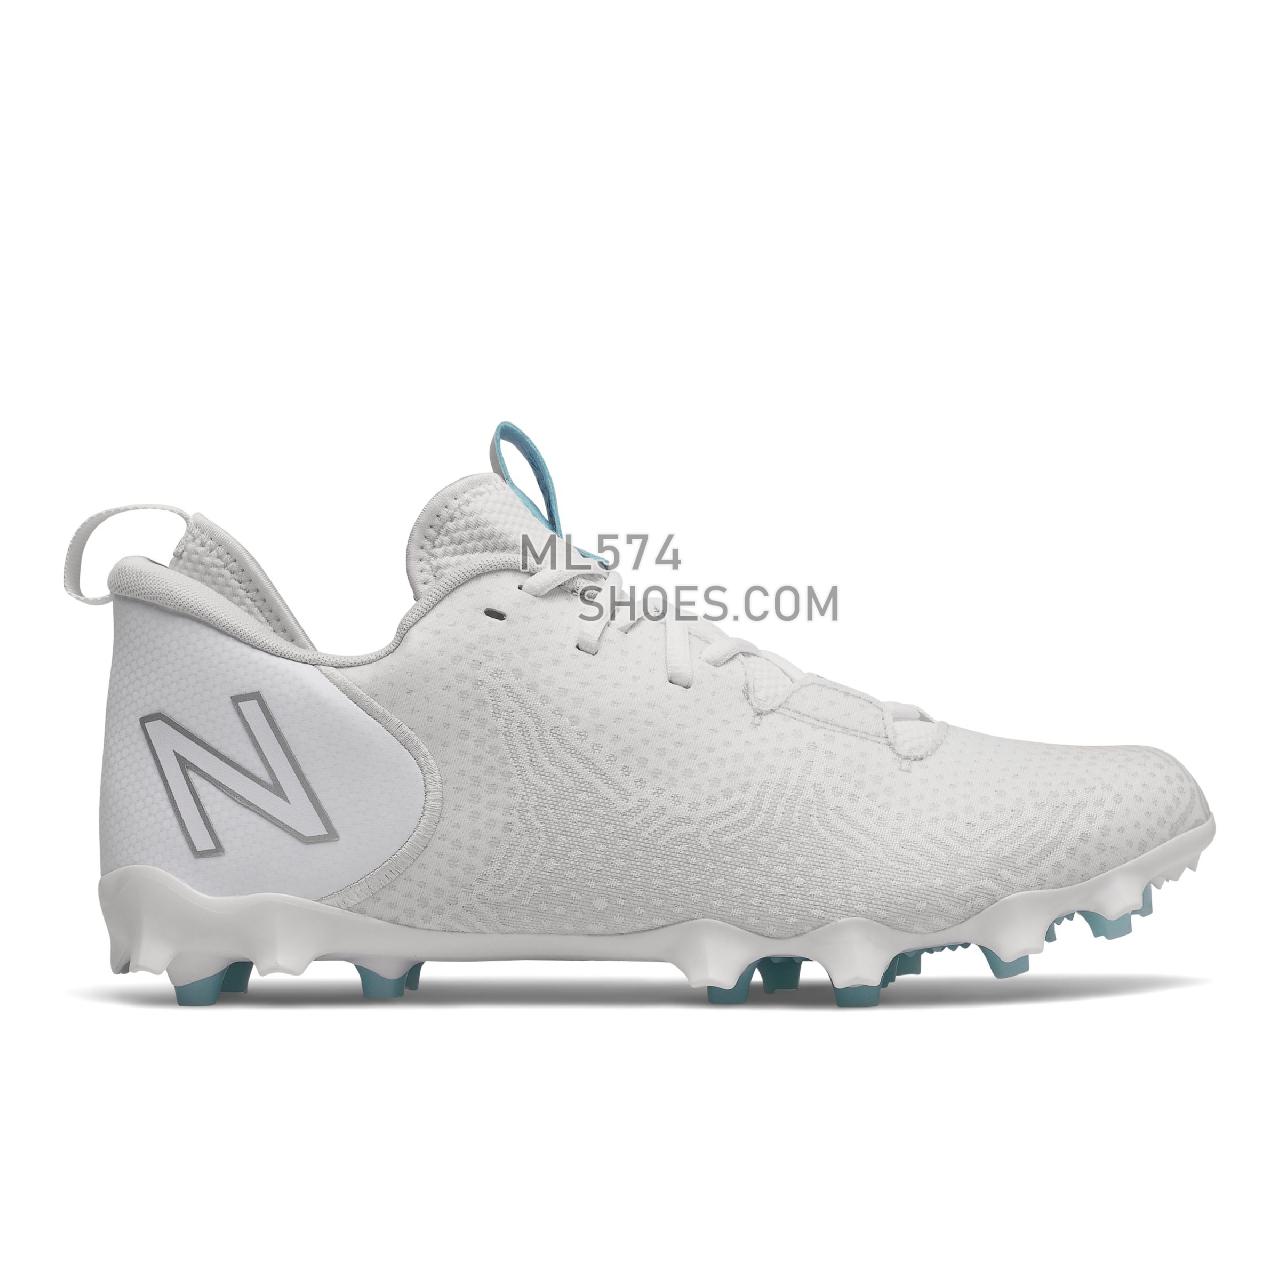 New Balance FreezeLX v3 Low - Men's Turf And Lacrosse Cleats - White with Grey - FREEZLW3